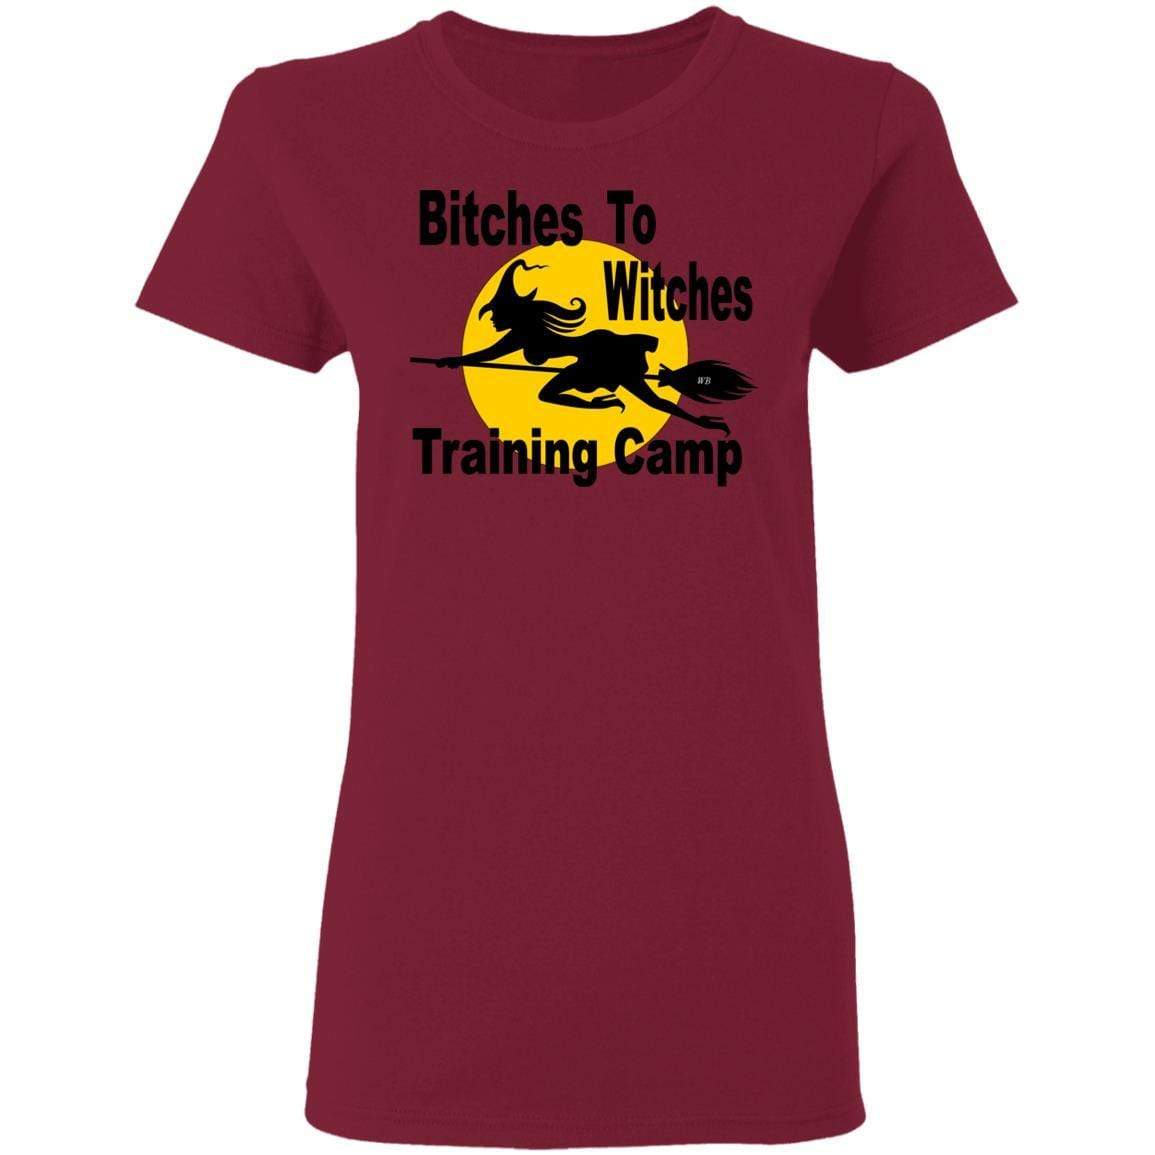 T-Shirts Cardinal Red / S WineyBitches.Co "Bitches To Witches Training Camp" Halloween Ladies' 5.3 oz. T-Shirt WineyBitchesCo